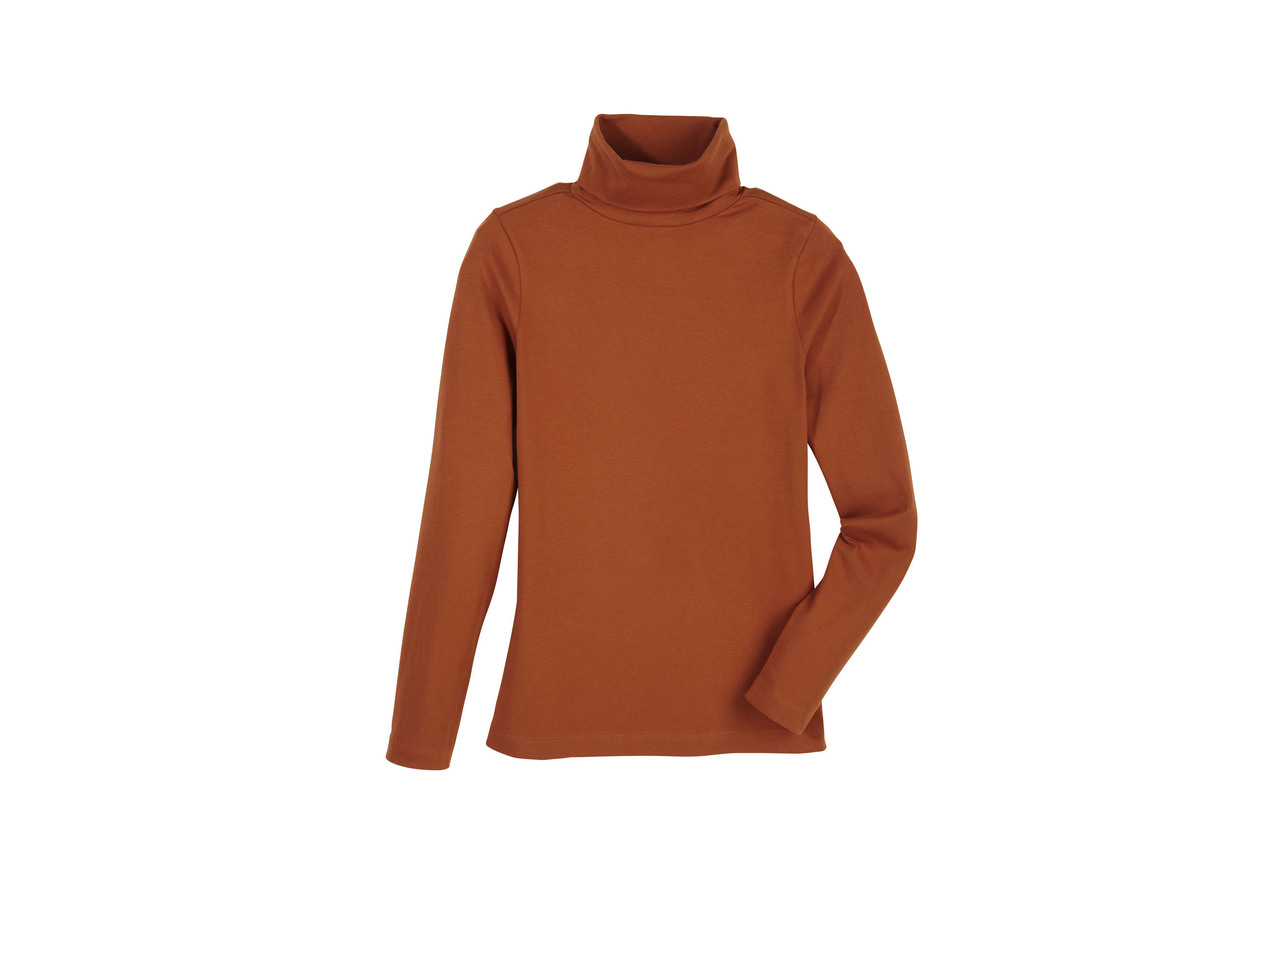 Roll Neck Tops